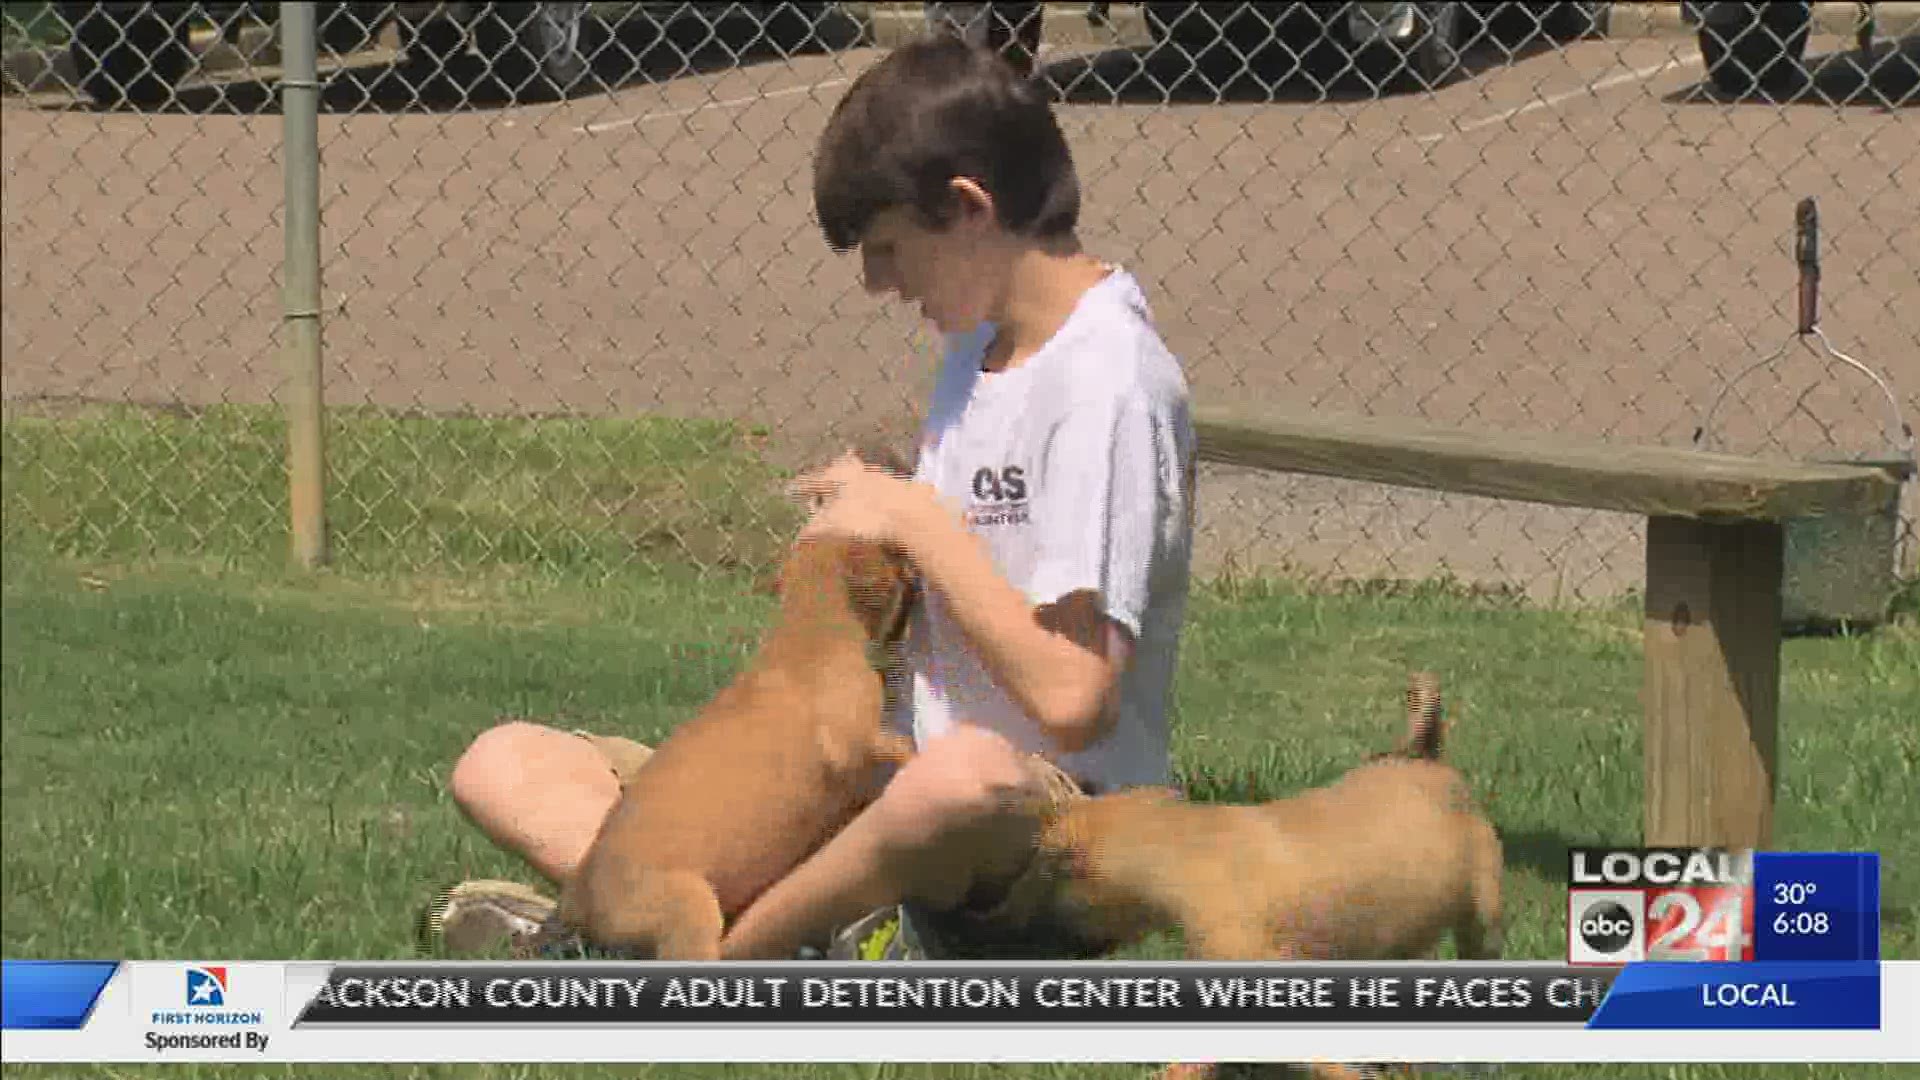 Animal shelters are always looking for ways to improve the lives of animals and to make them more adoptable. The Collierville Animal Shelter is looking to add an off